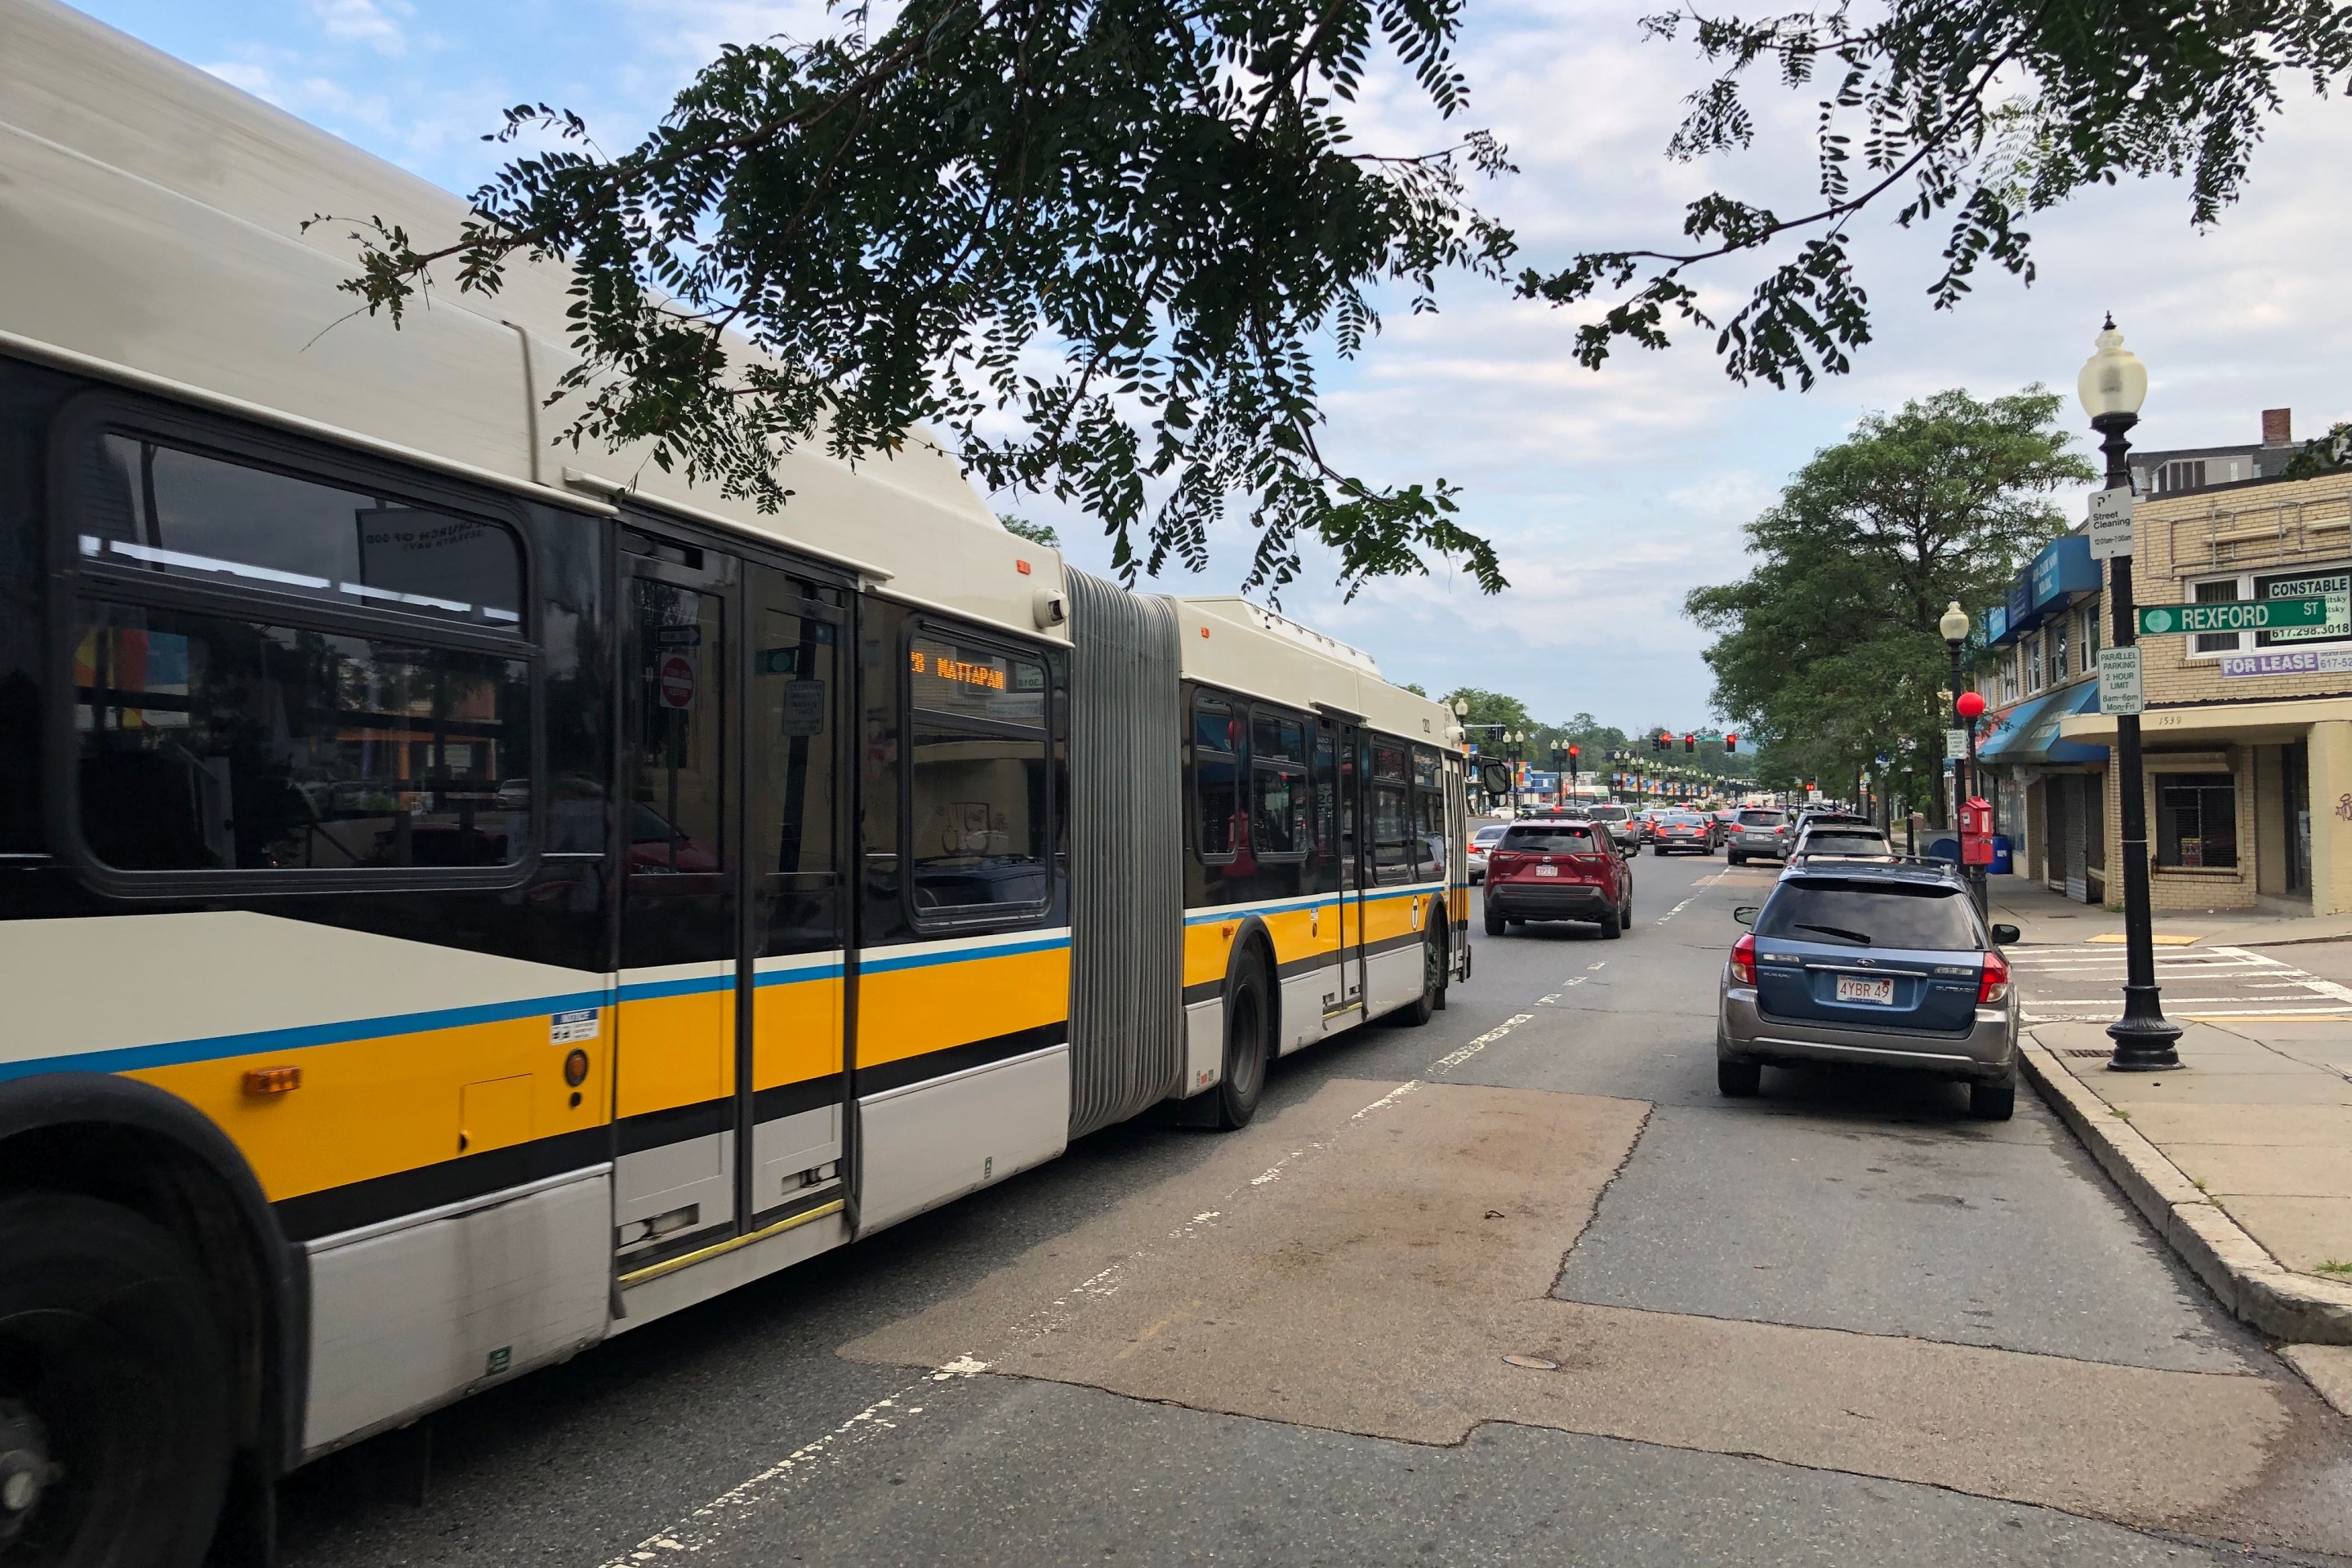 An extra-long articulated bus in the white, yellow, and black MBTA color scheme waits in traffic on a wide multi-lane street with a red light in the distance. An electronic sign in a side window of the bus says "28 MATTAPAN." A street sign on the left says "Rexford Street".